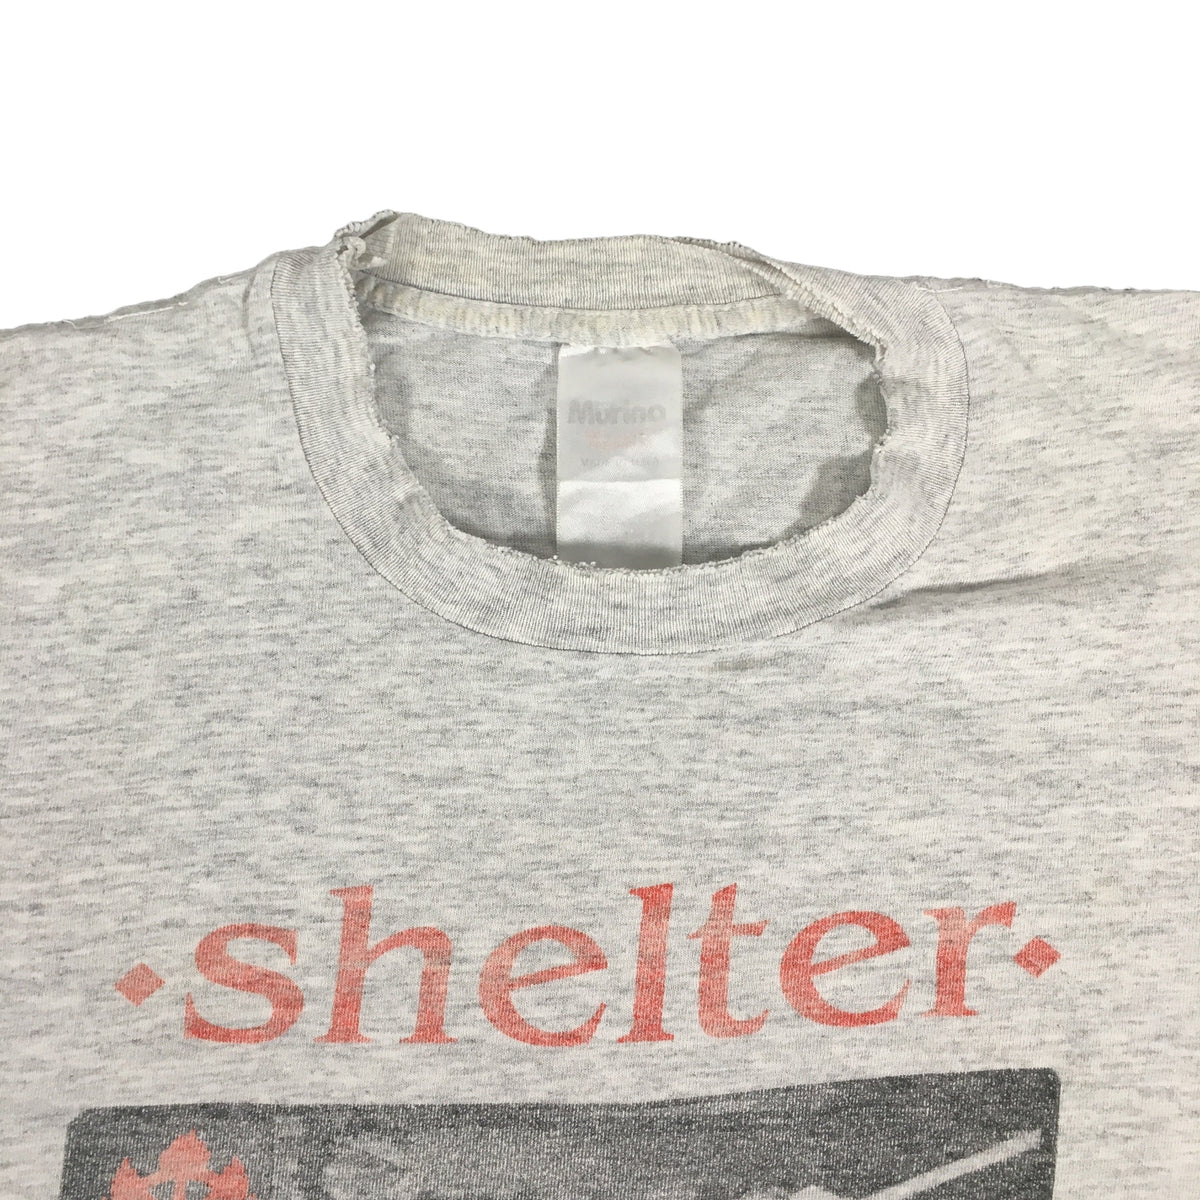 Vintage Shelter &quot;In Defense Of Reality&quot; T-Shirt - jointcustodydc